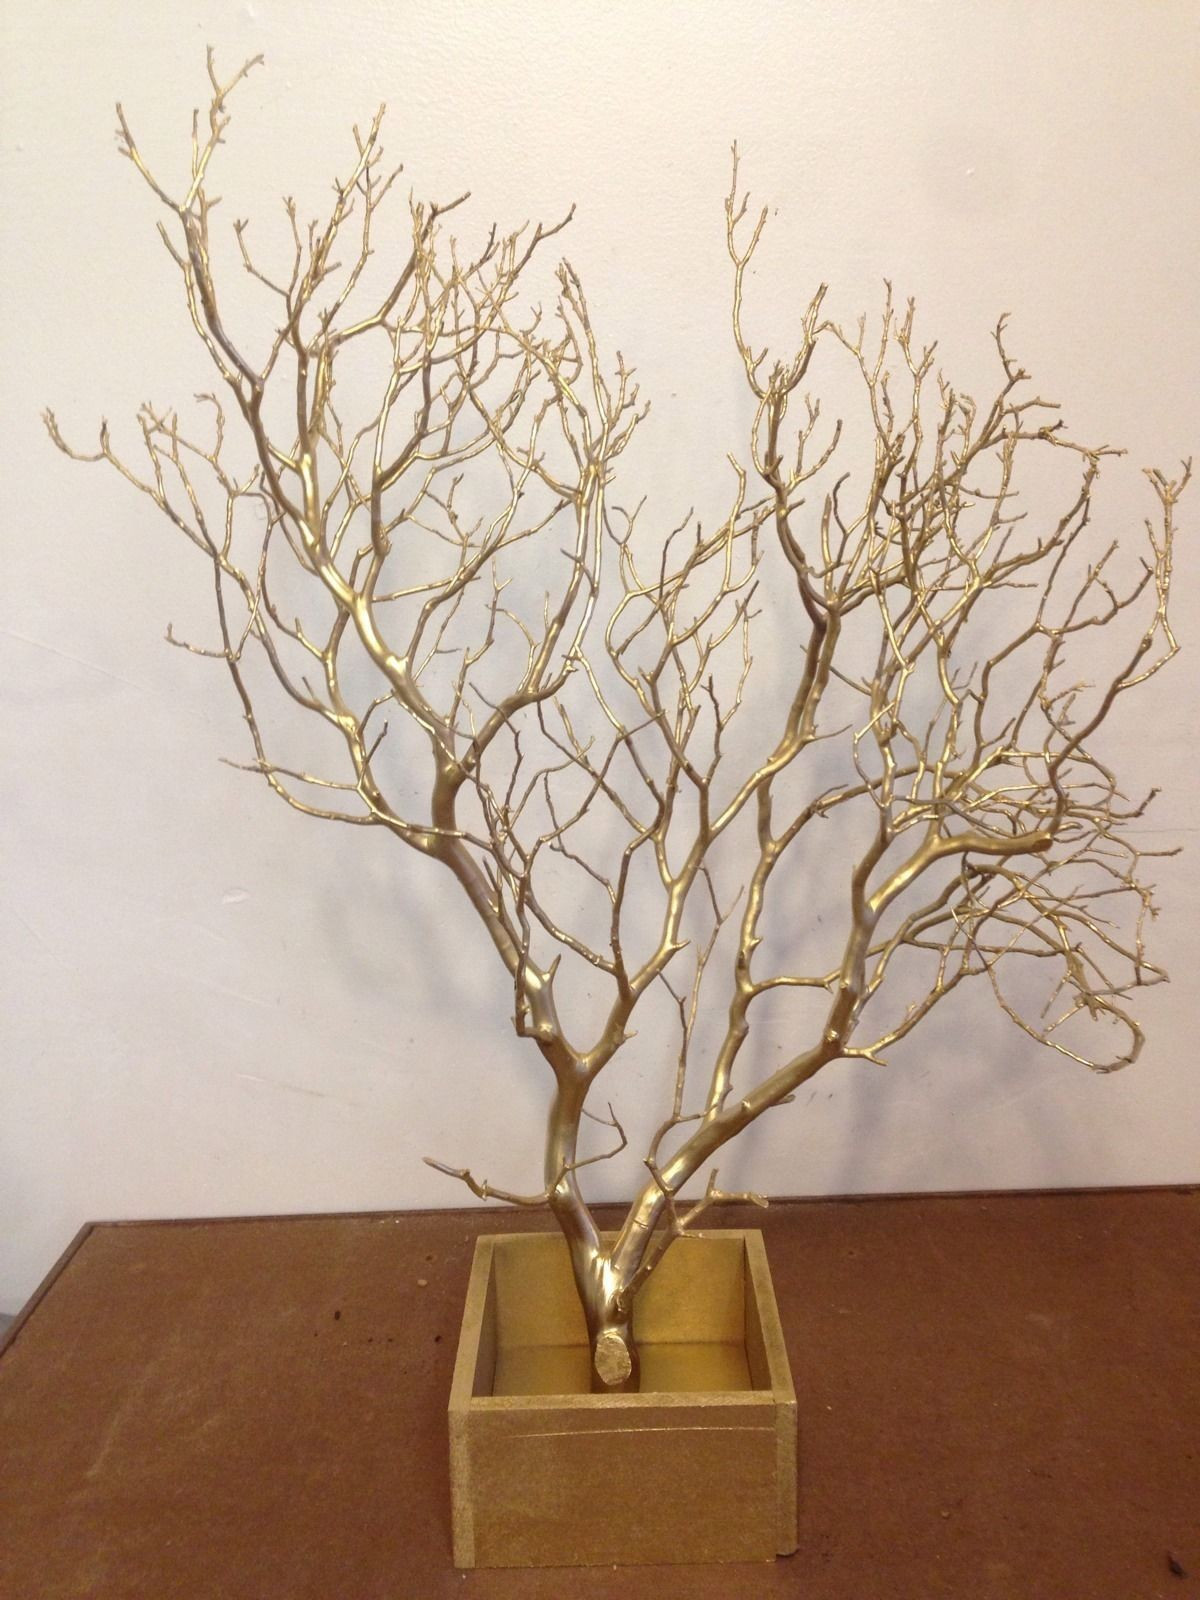 30 Recommended Tall Decorative Vases 2024 free download tall decorative vases of decorative branches for weddings awesome tall vase centerpiece ideas intended for decorative branches for weddings inspirational gold manzanita branch centerpiece of